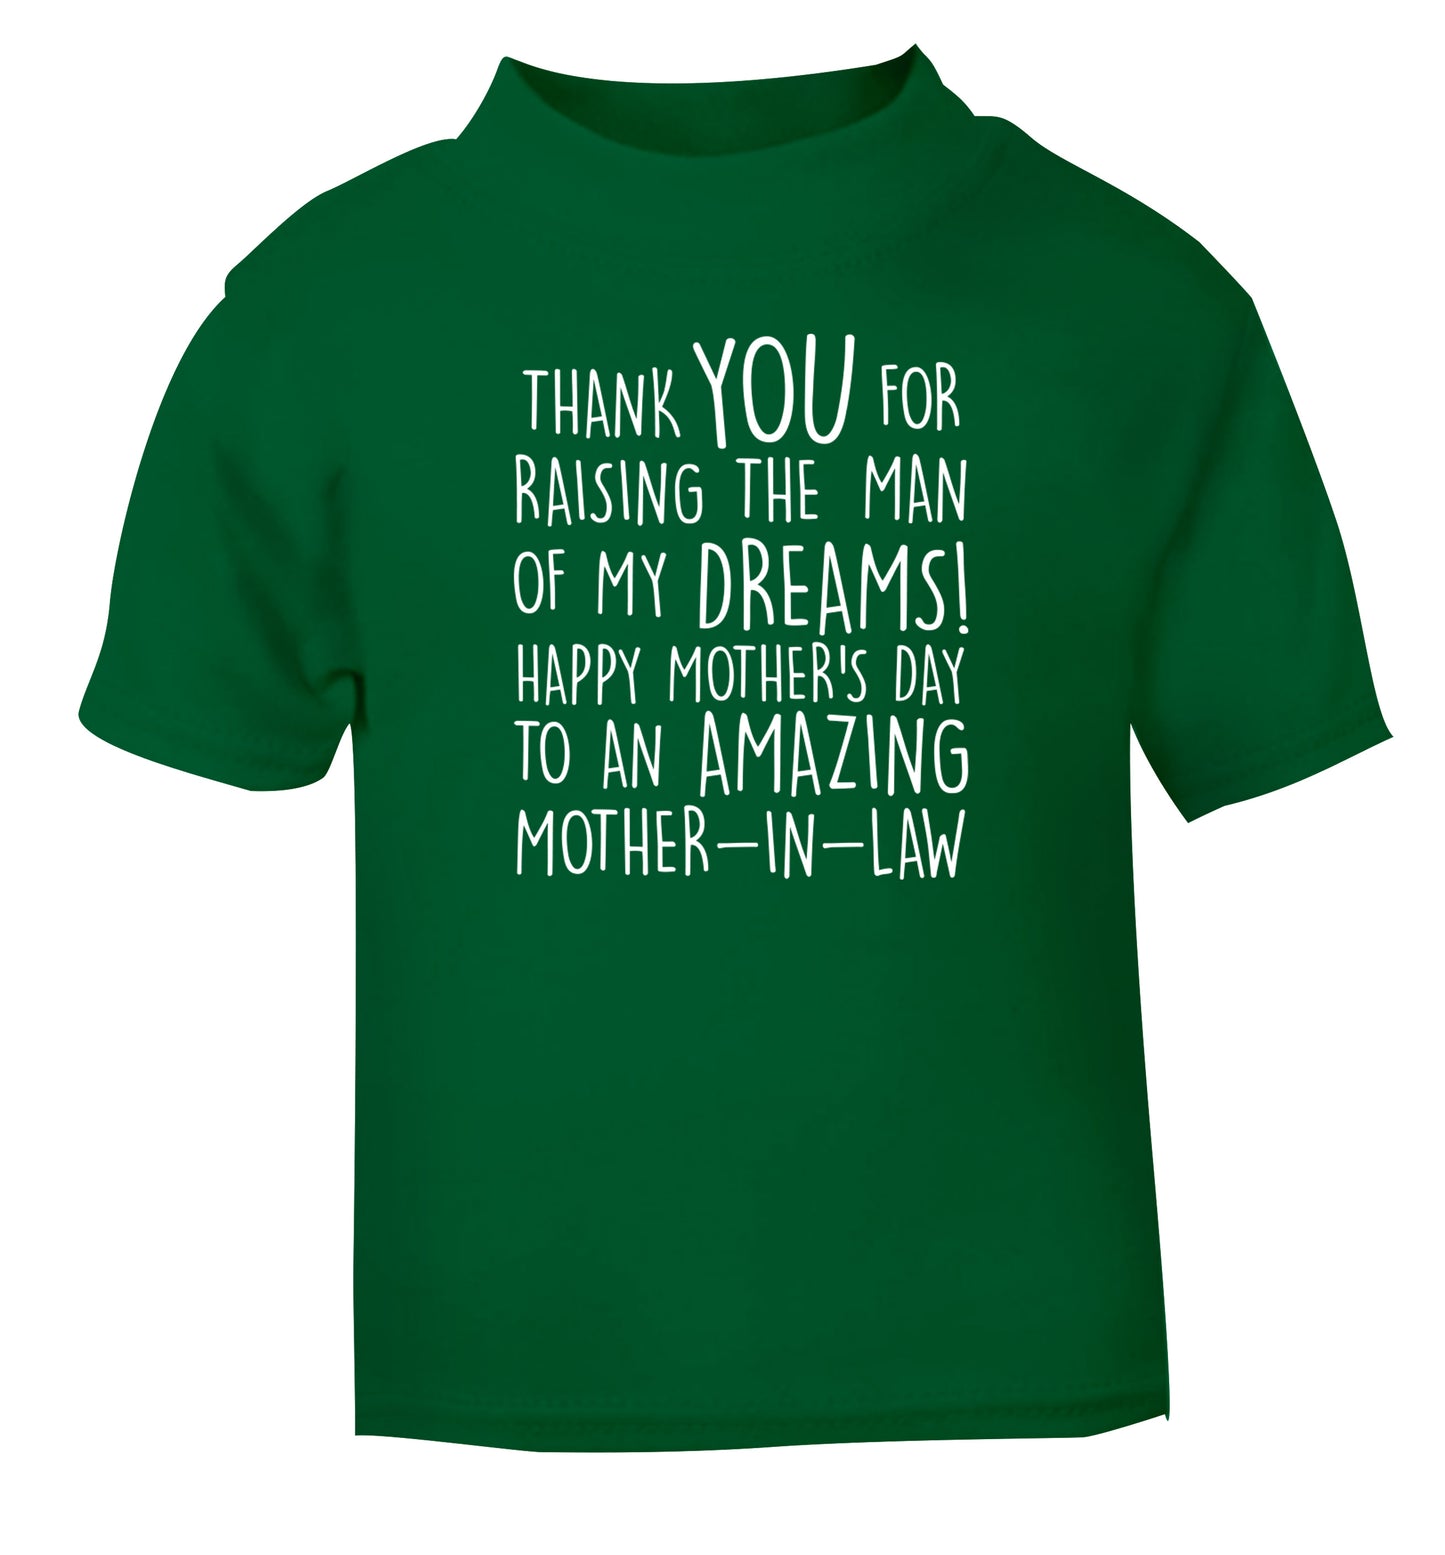 Thank you for raising the man of my dreams happy mother's day mother-in-law green Baby Toddler Tshirt 2 Years